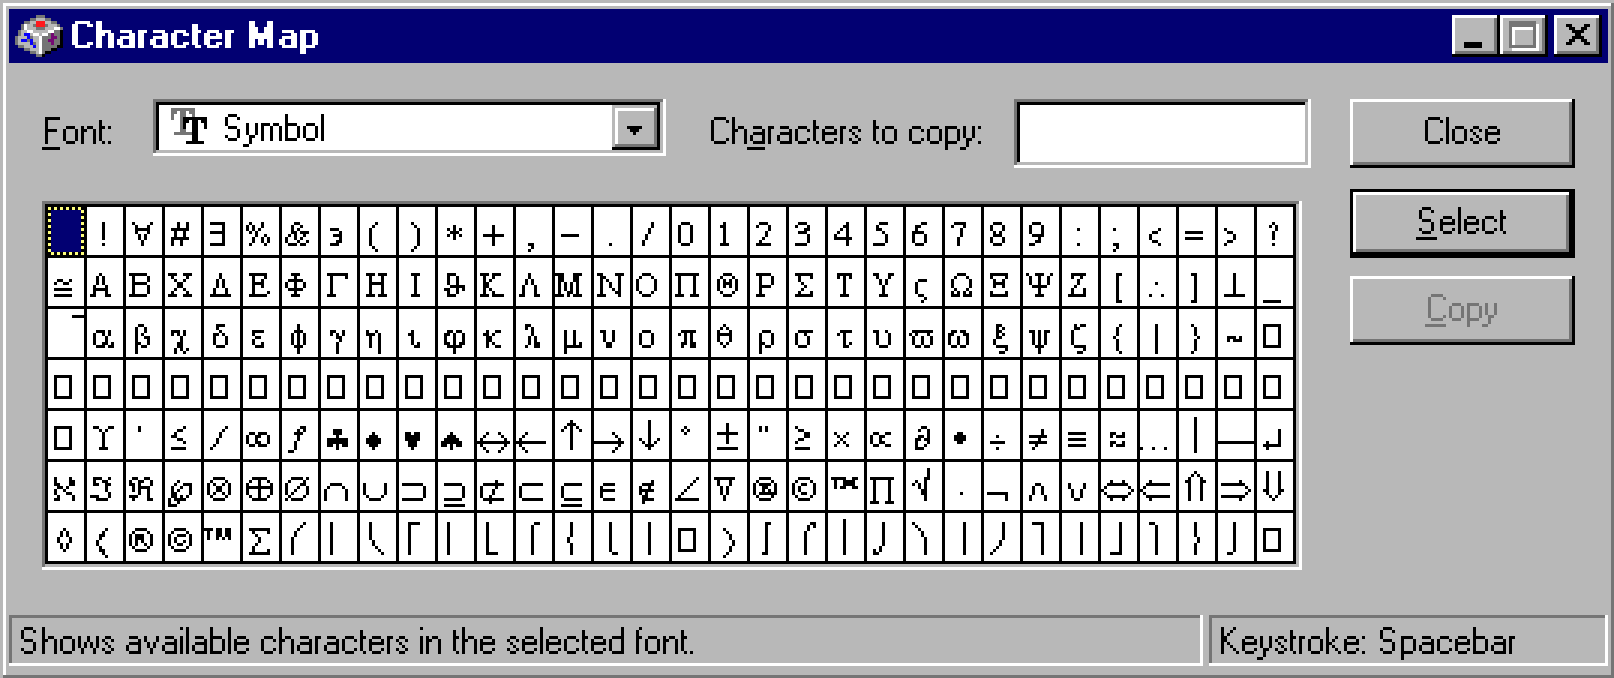 Screen shot of the Character Map program in Windows 95